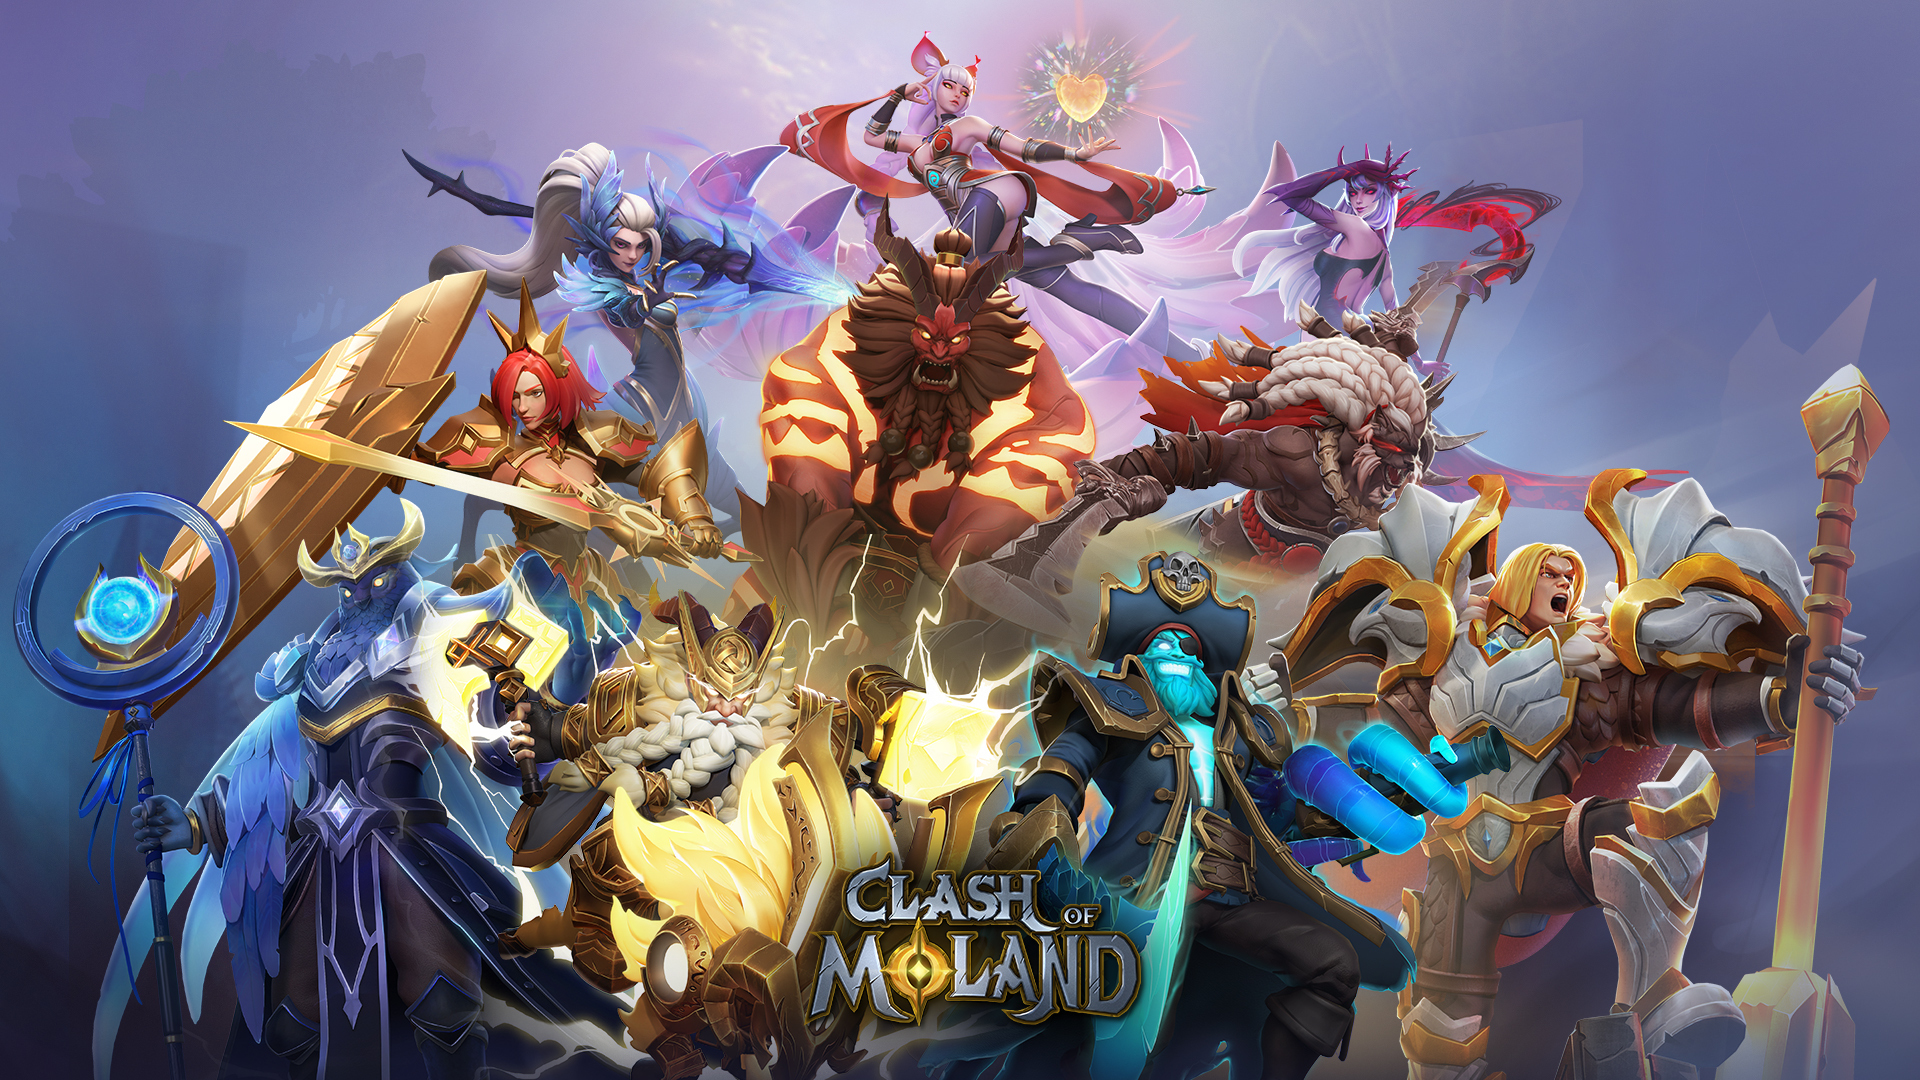 MOBOX on X: 👋Hey Hey MOBOXers To have an even better experience Playing  🏰Clash of MOLand⚔️ Download the #ClashOfMoland APP !🥳 🤖Android Only !⤵️   🍏iOS coming SOON! #Metaverse #MetaverseNFT  #gamingNFTs #NFTProject #